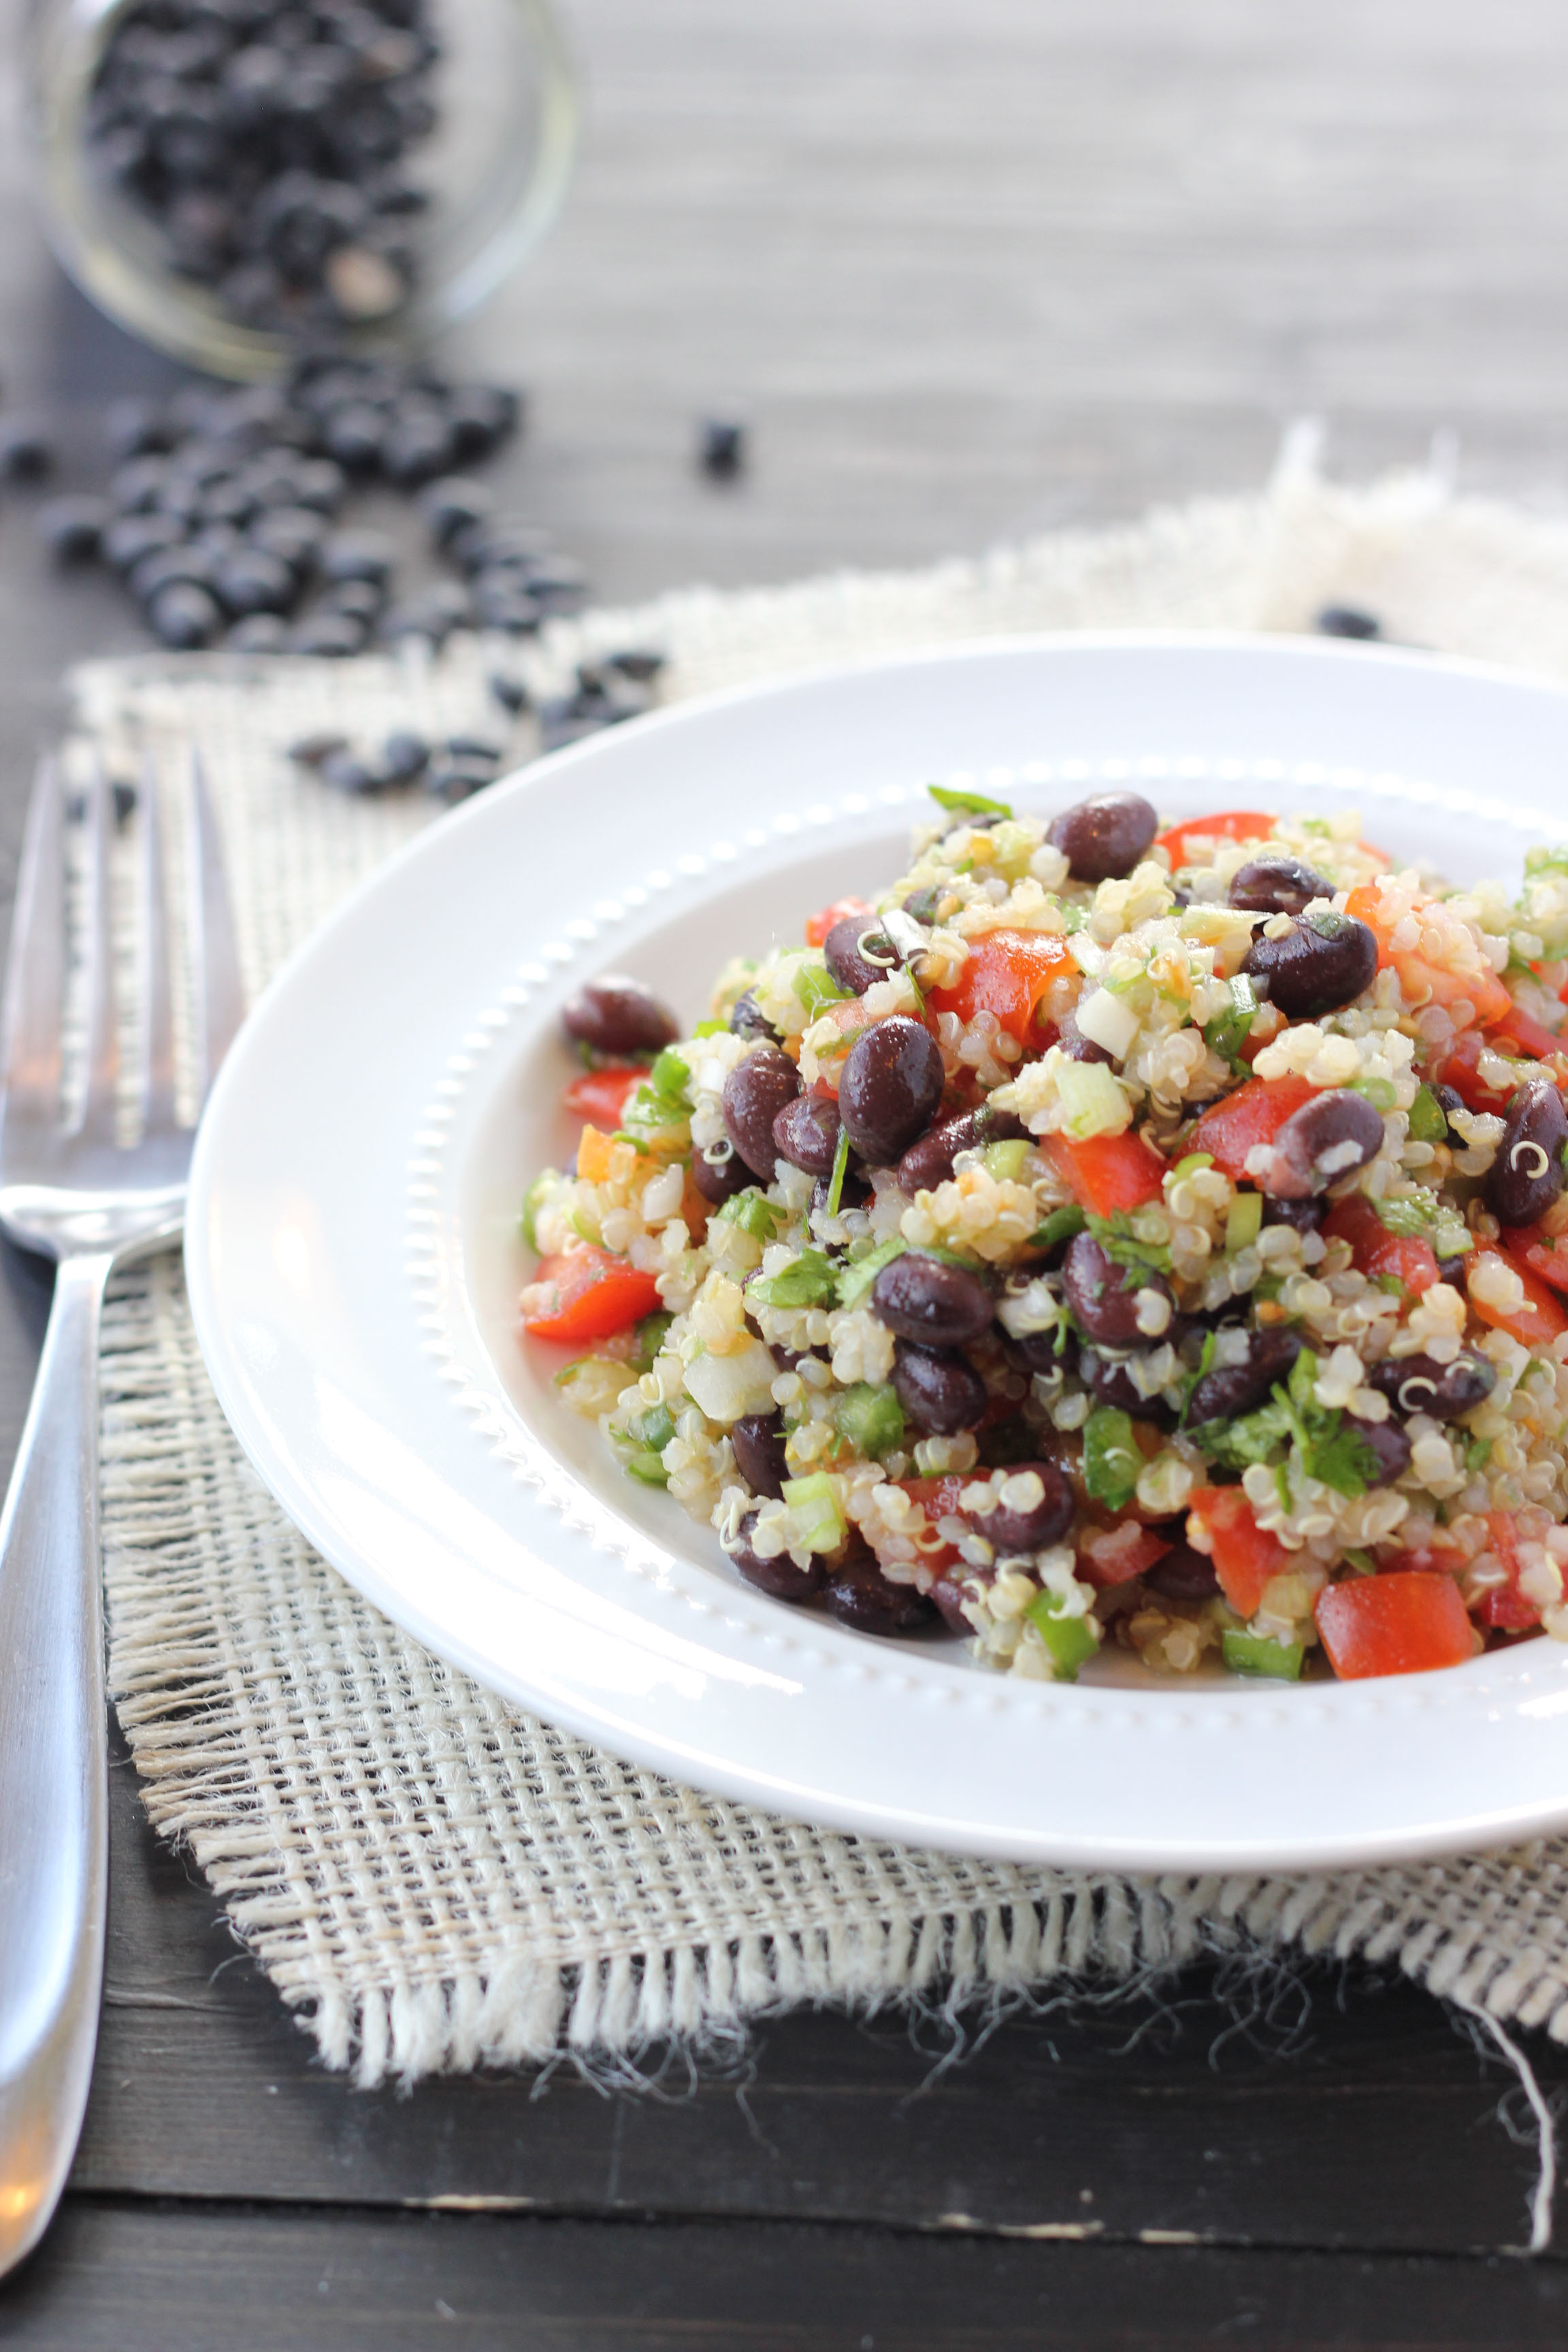 An example of the Quinoa and Black Bean recipe